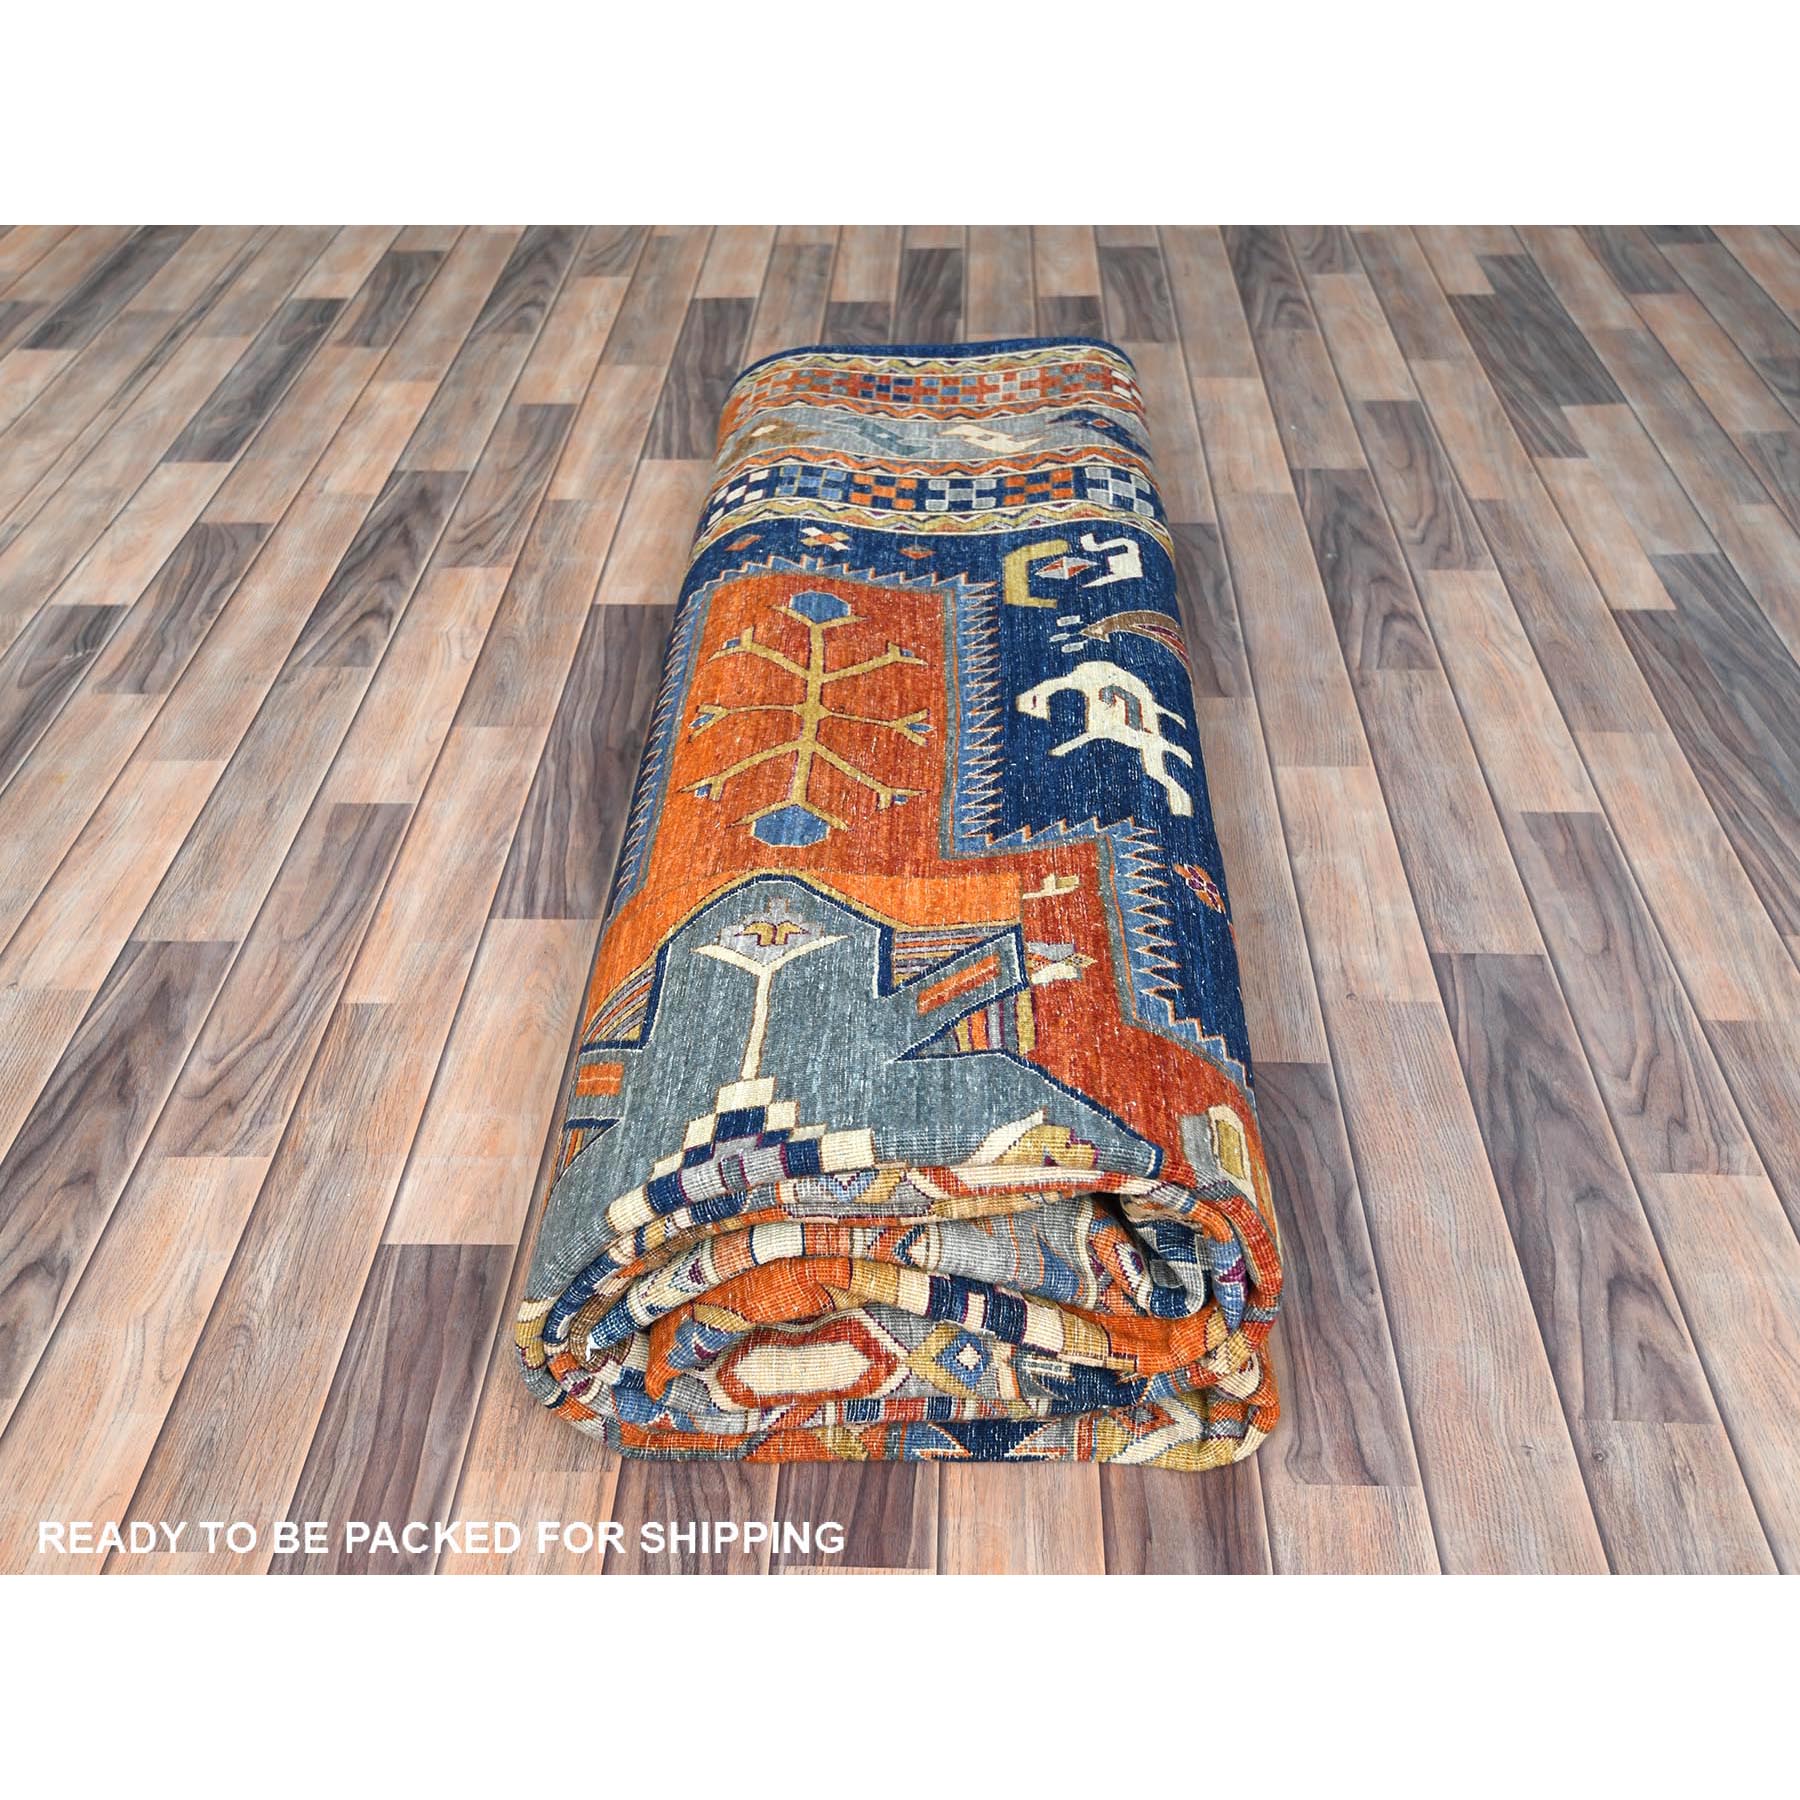 10'1"x13'9" Navy Blue, Extra Soft Wool Hand Woven, Armenian Inspired Caucasian Design with Bird Figurines 200 KPSI, Natural Dyes Densely Woven, Oriental Rug 